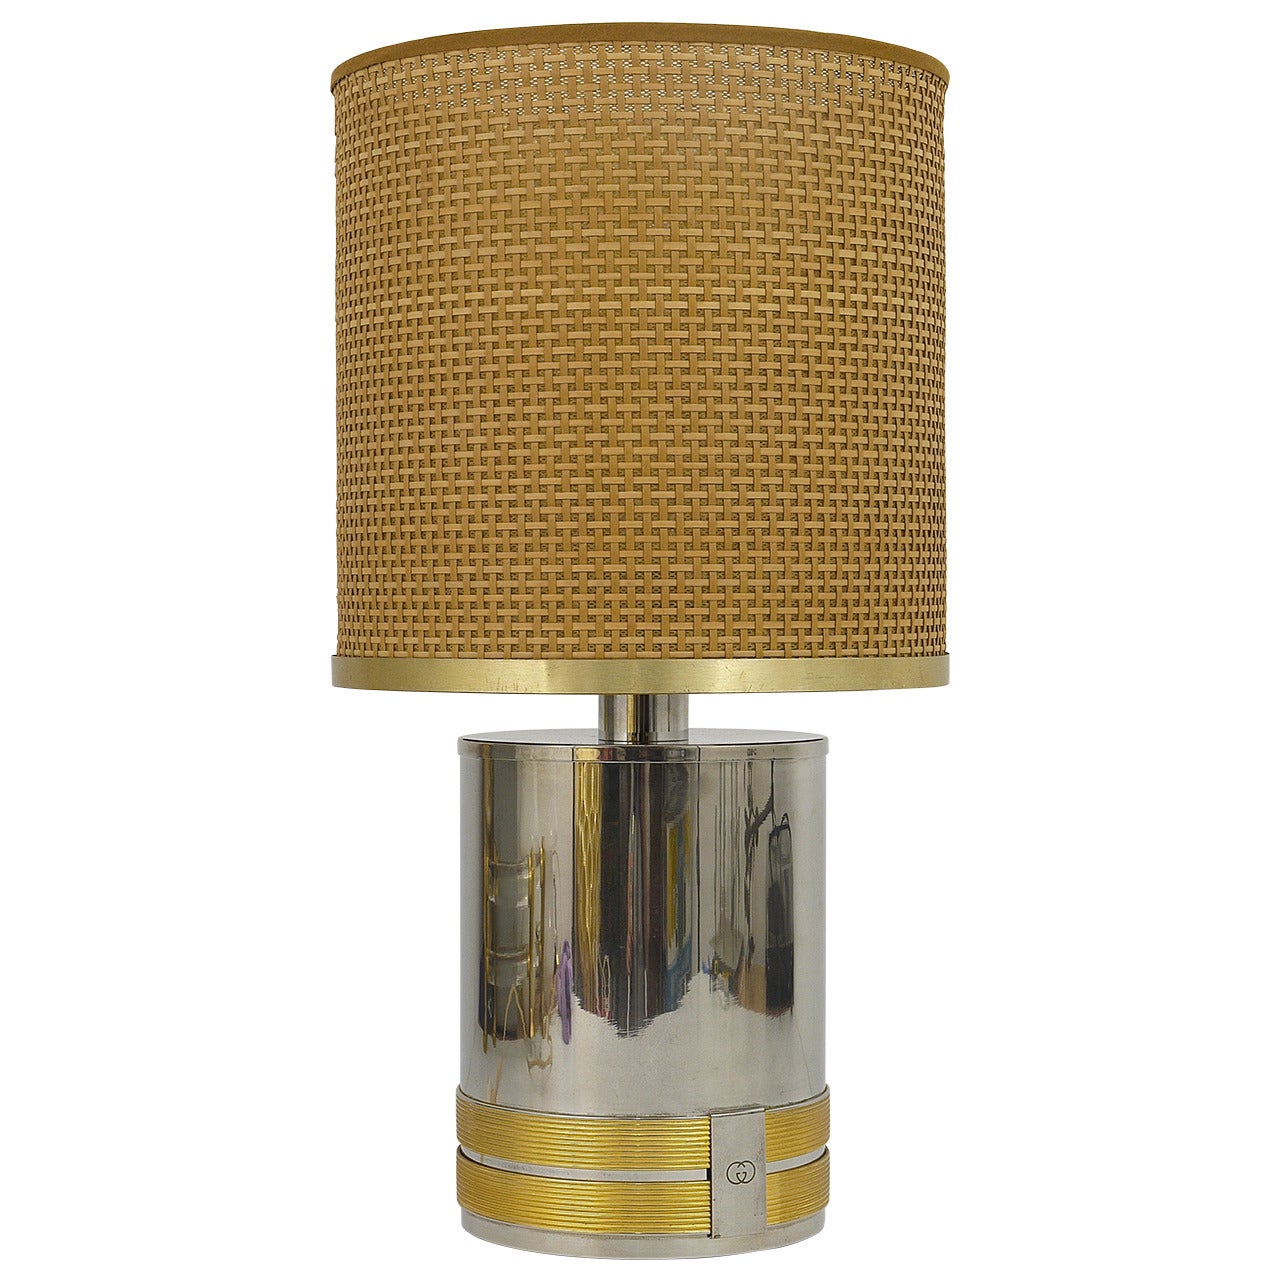 Outstanding Original Gucci Italy Table Lamp, 1970s